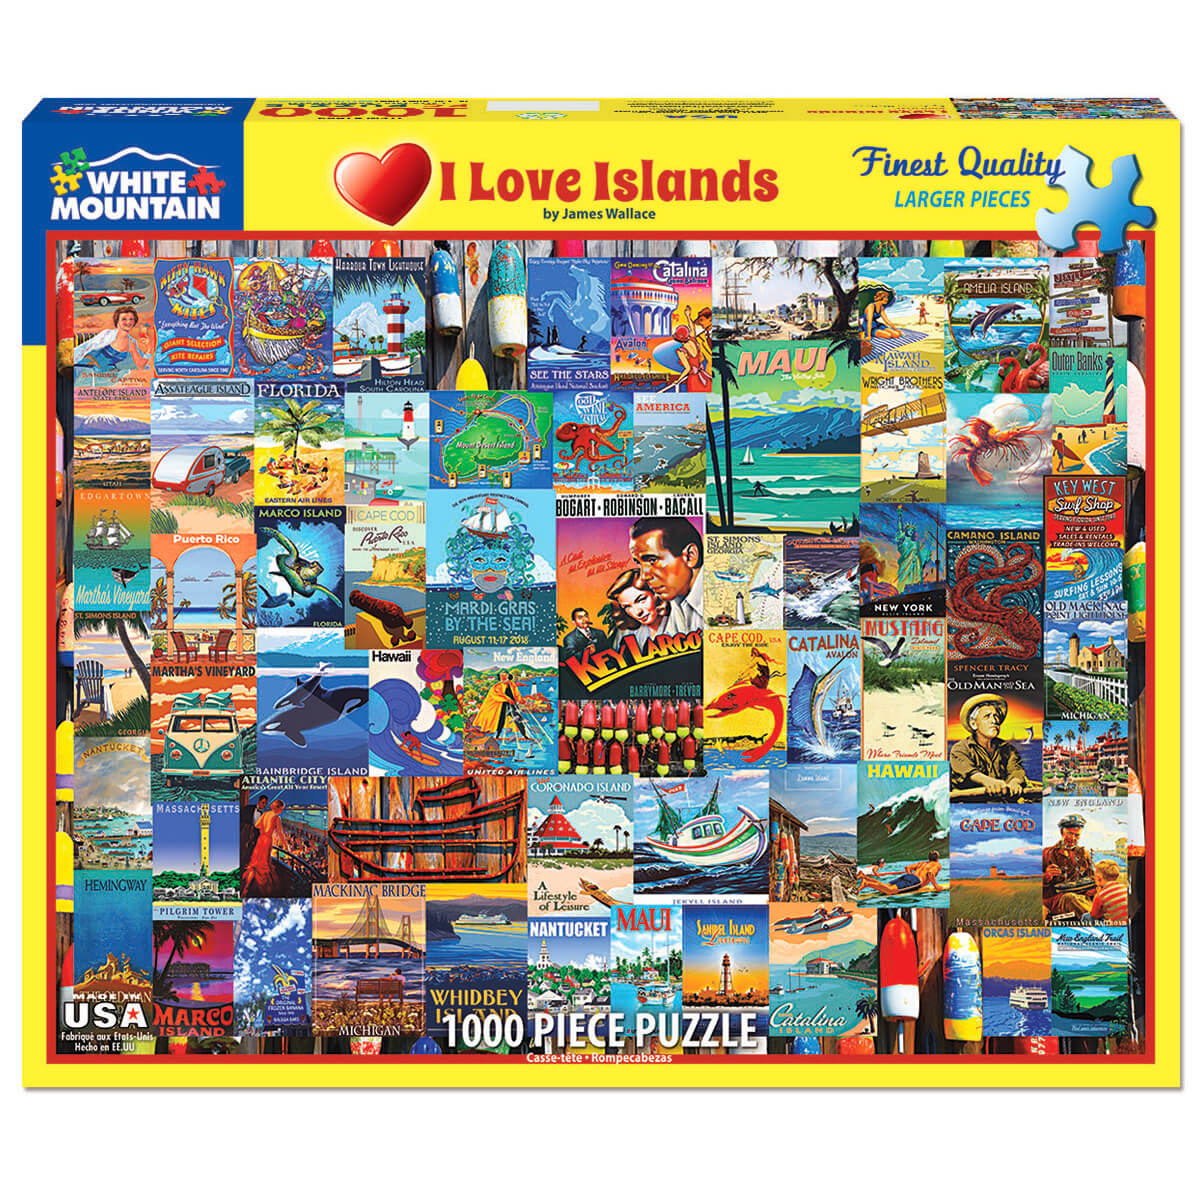 White Mountain Puzzles I Love Islands 1000 Piece Jigsaw Puzzle